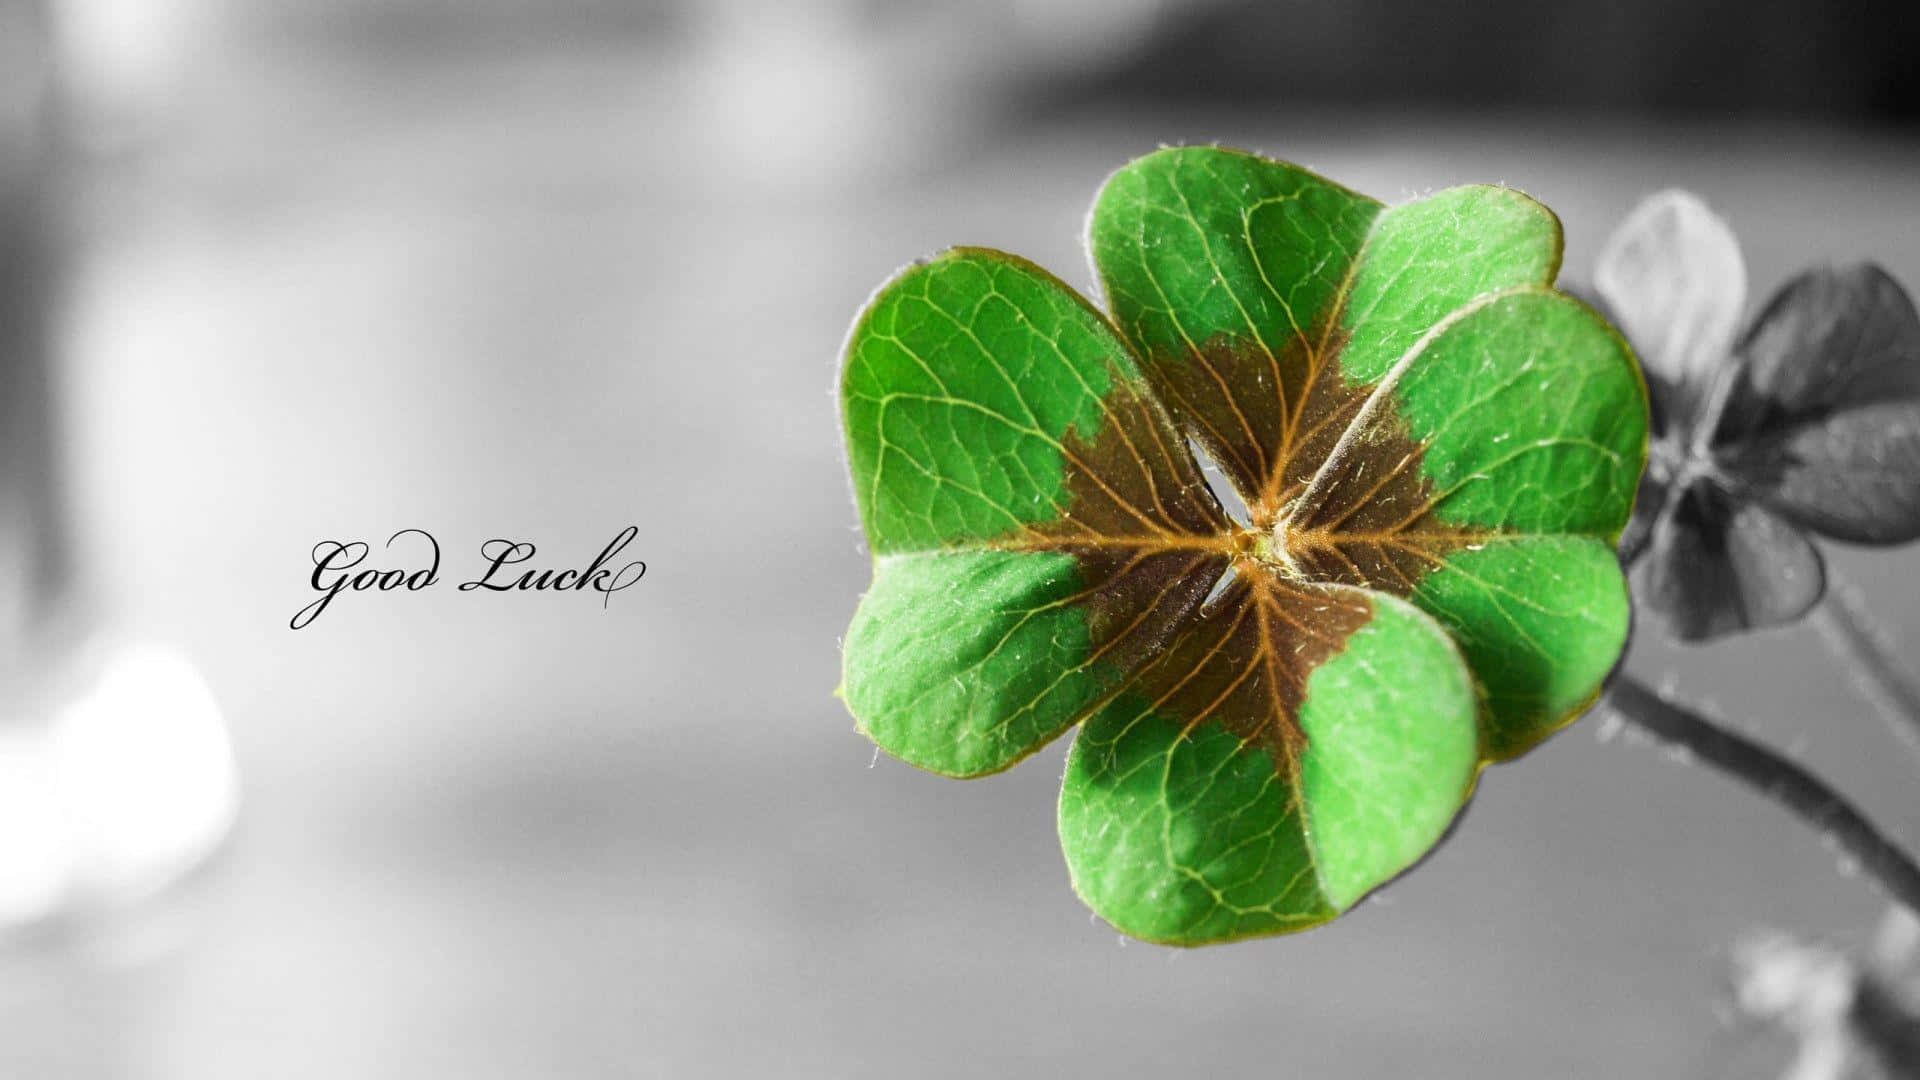 A Clover With The Words Good Luck On It